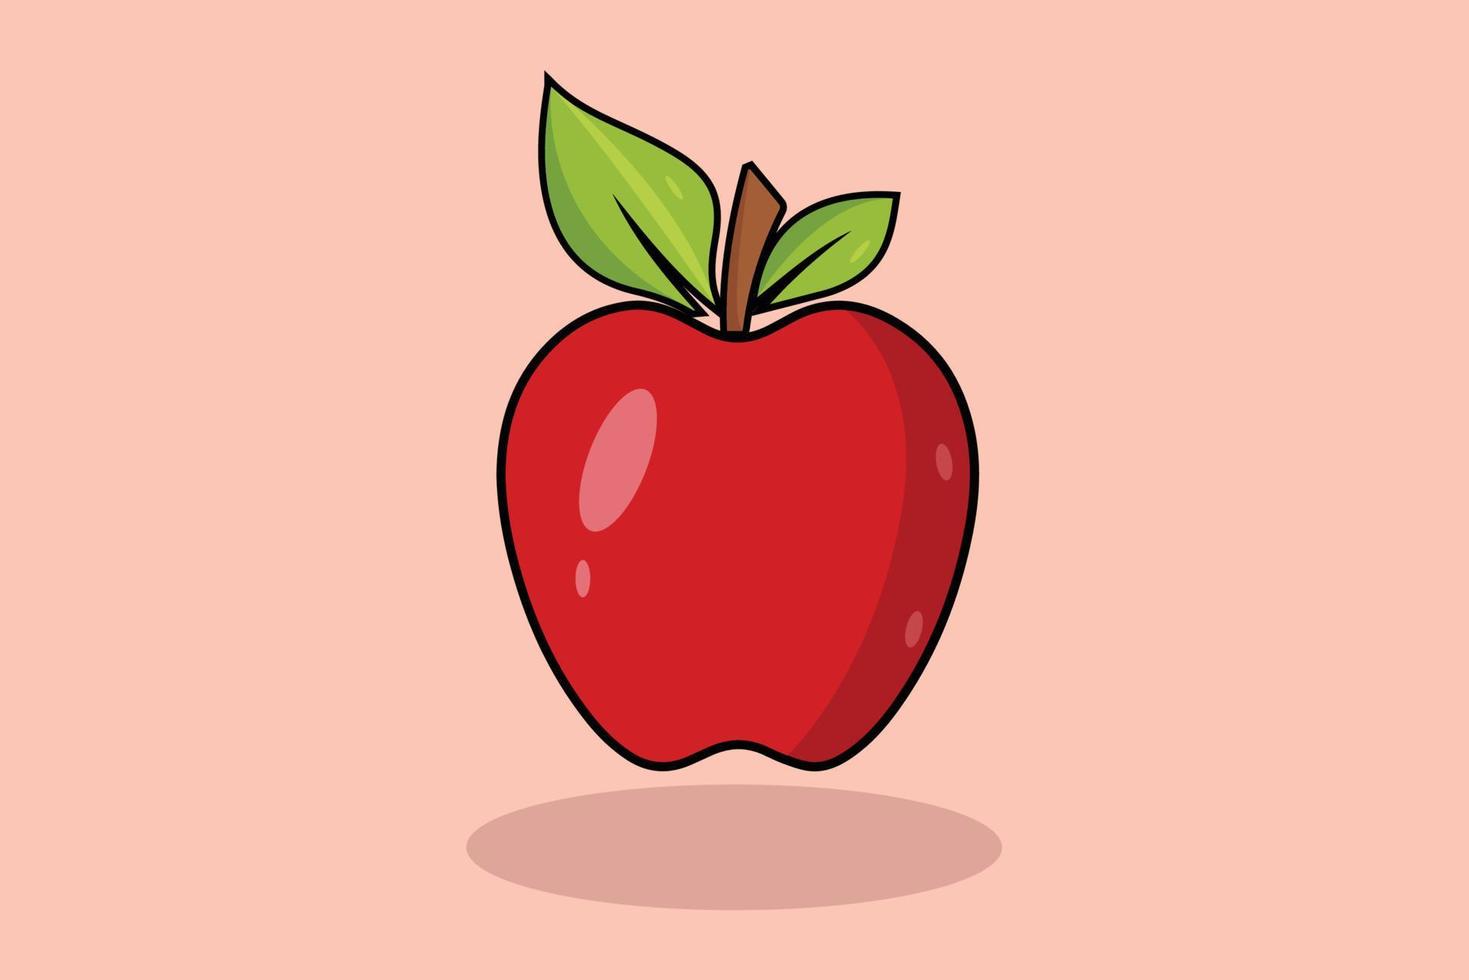 A red apple with green leaves on it vector